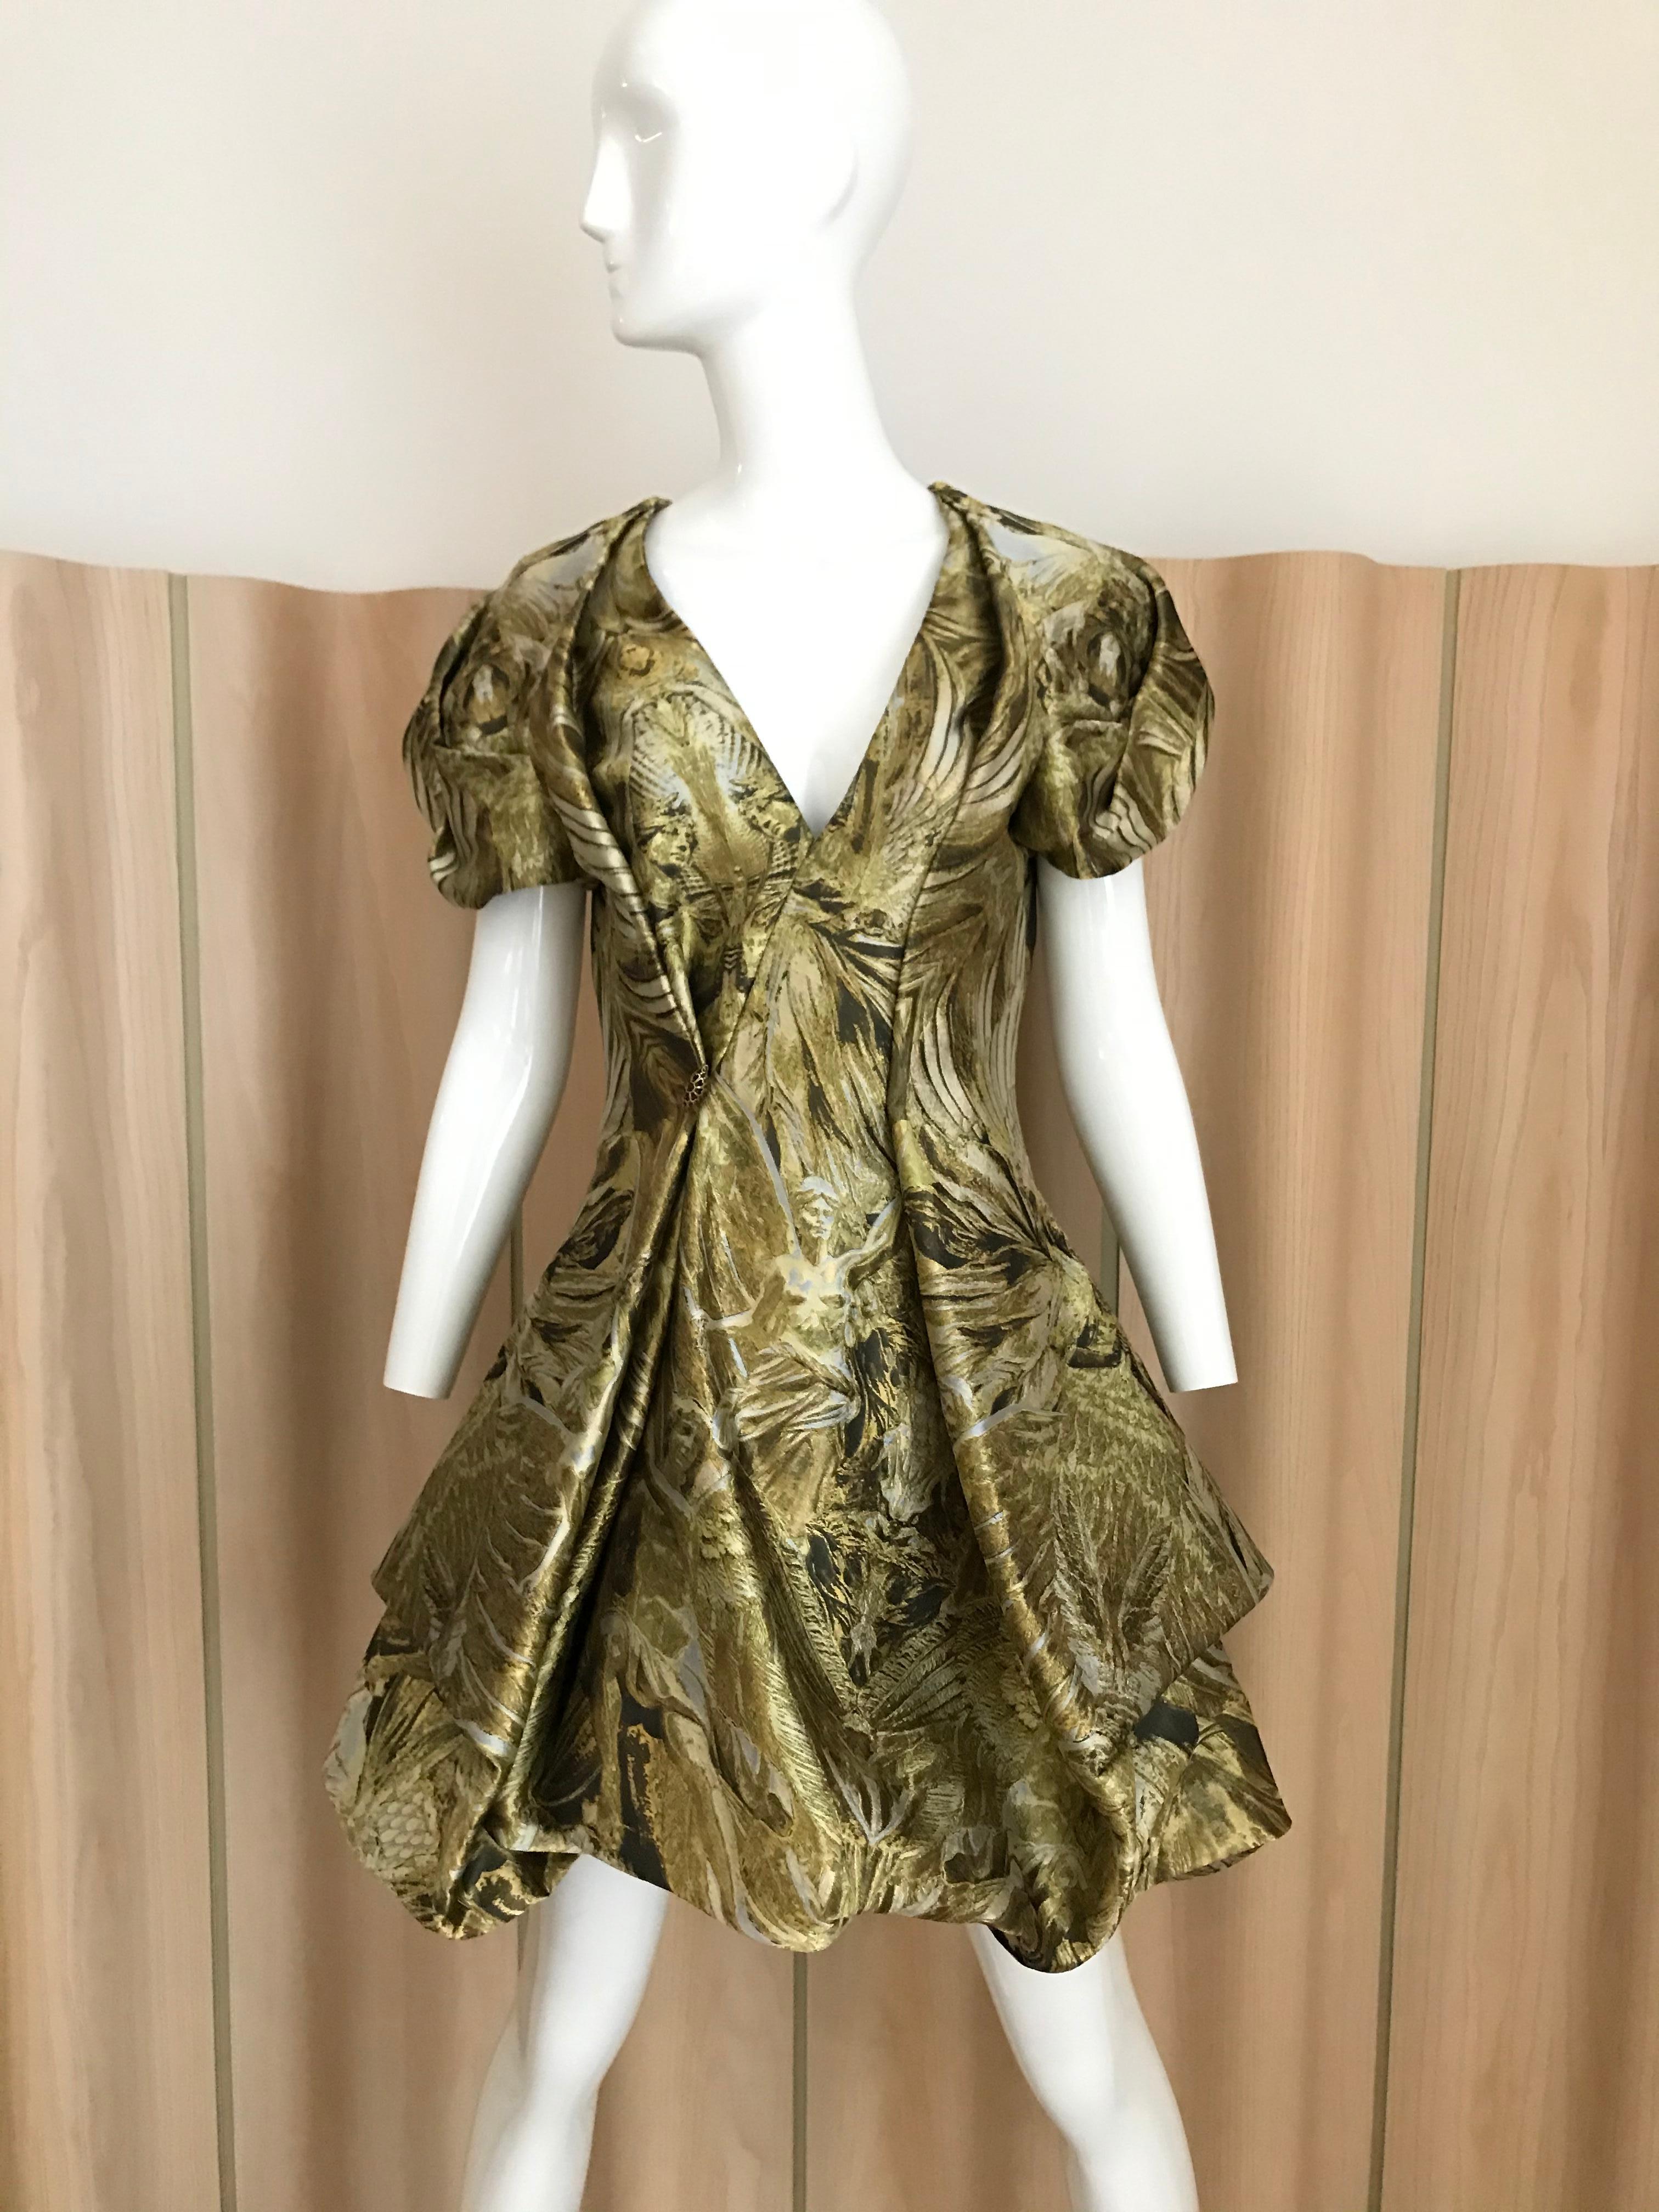 2010 Alexander McQueen Gold and black screen printed medieval, baroque inspired print dress.
In excellent condition. Marked size 42
Measurement:
Bust: 36”. / Rib cage: 29”. / Waist: 28”. / Hip: 38”
Dress Length at the front : 34”. / Back Length: 38”